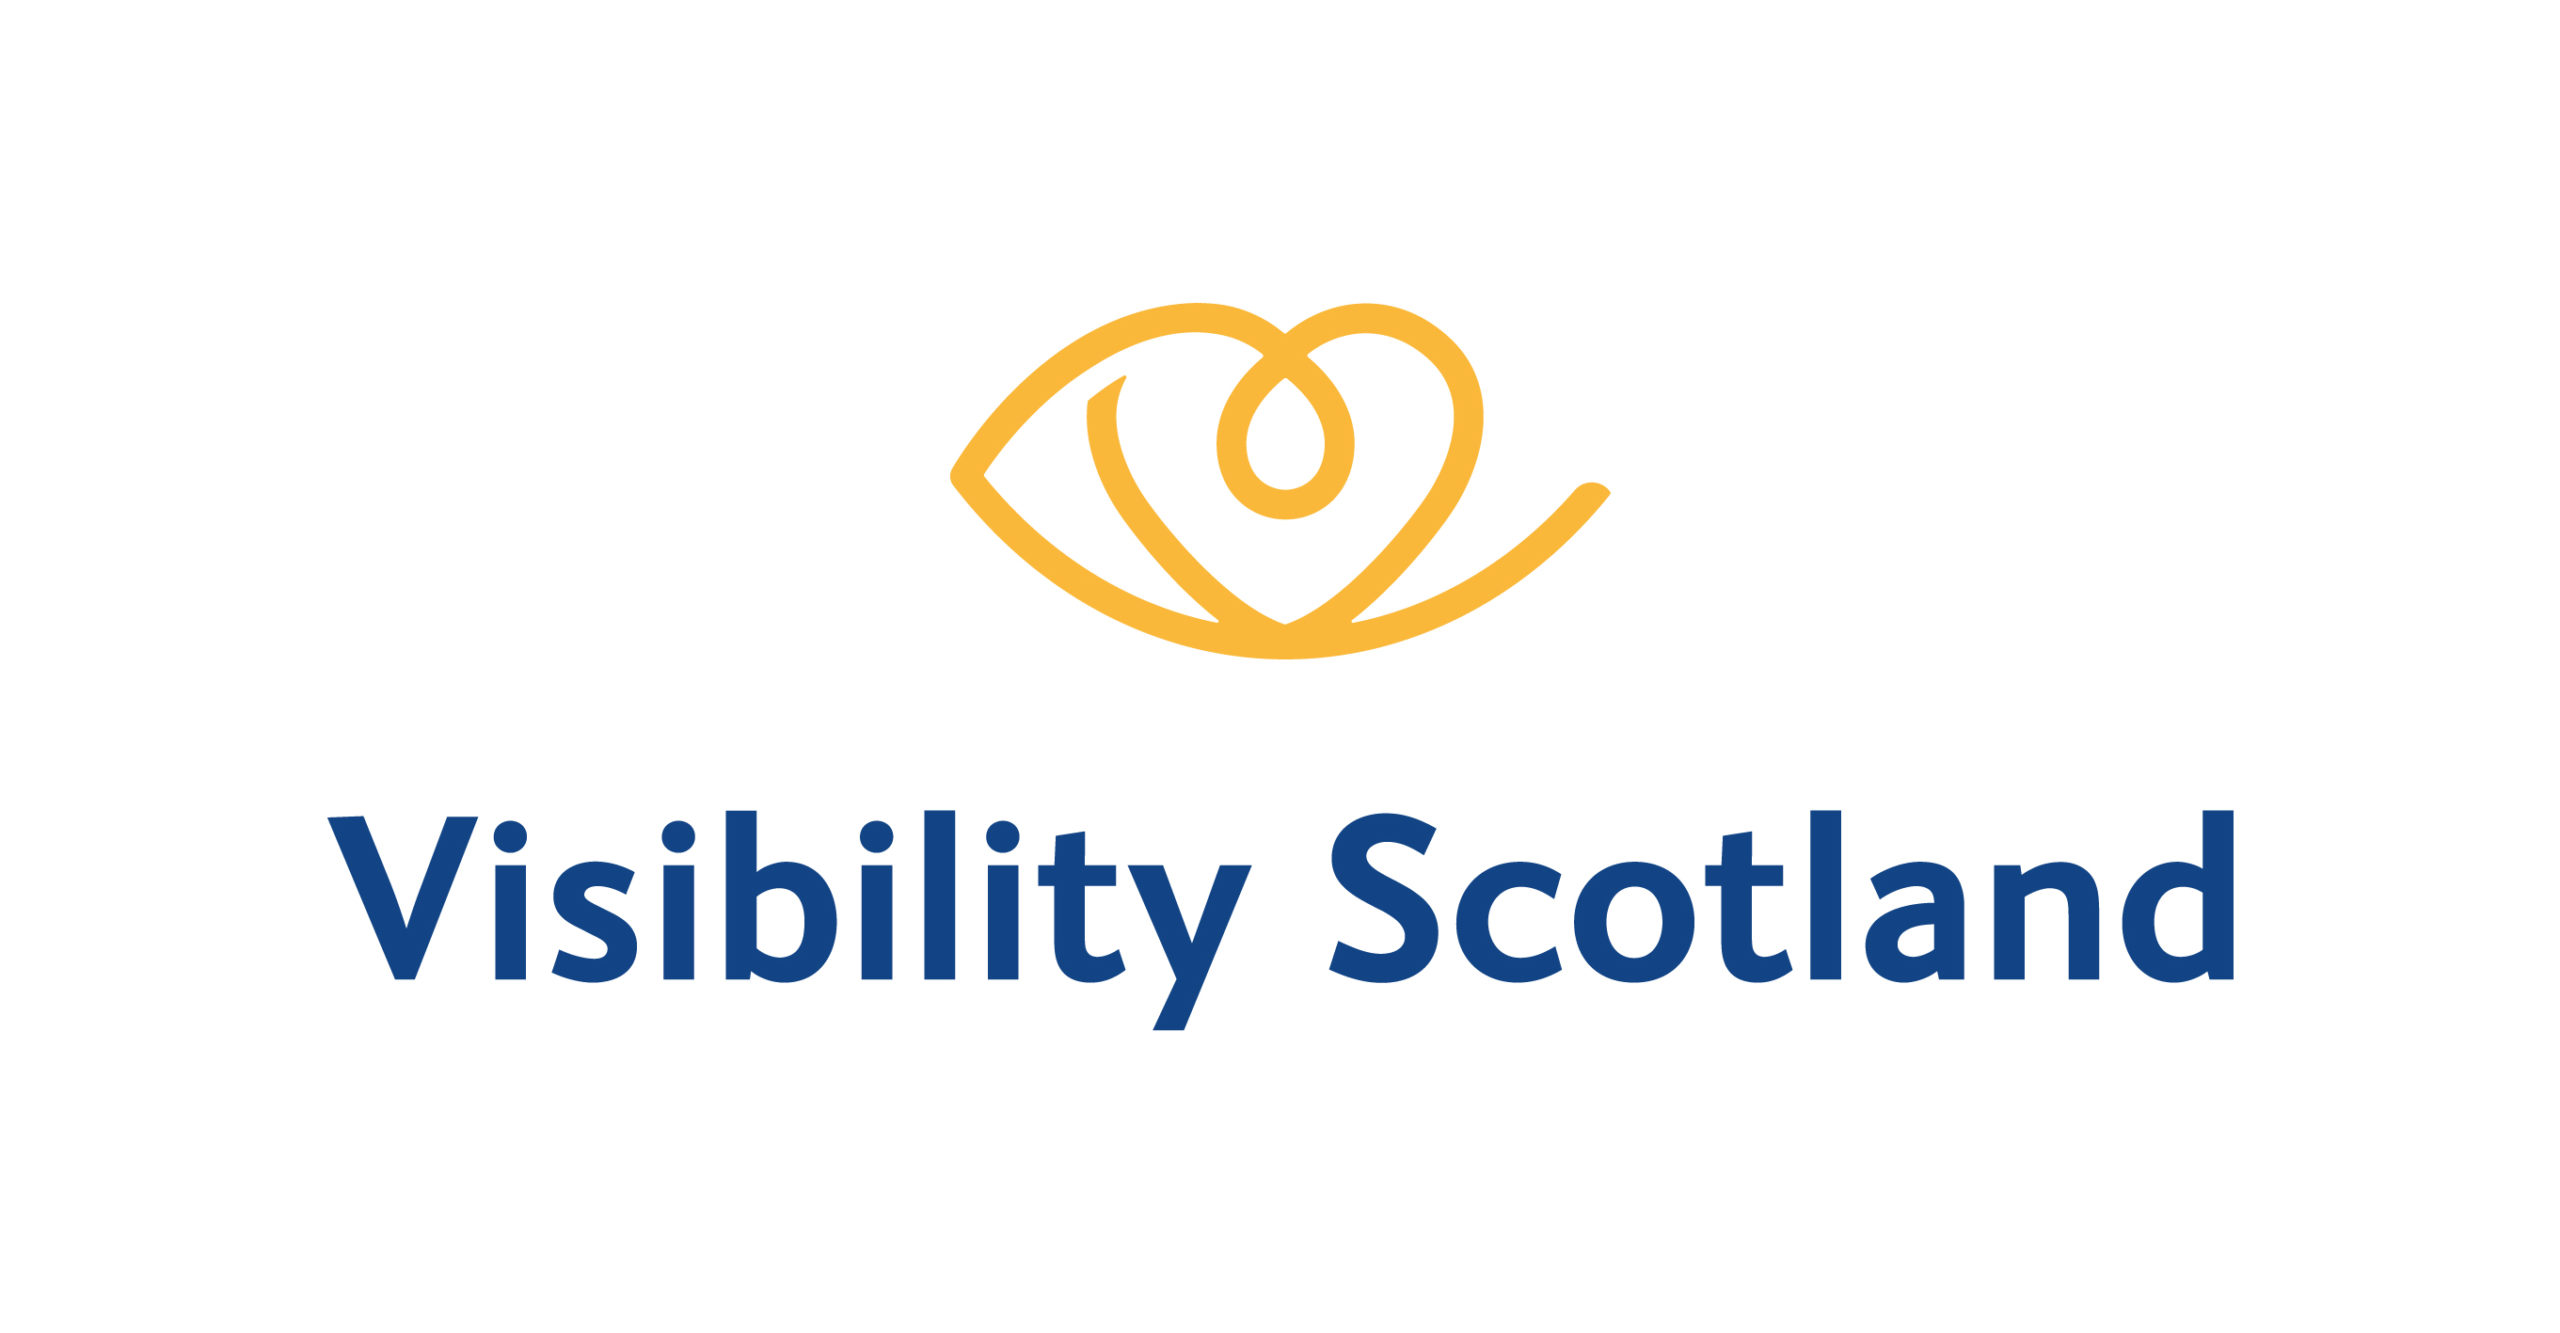 Visibility Scotland logo with drawing of an eye with a heart shape in the centre above the words “Visibility Scotland”.